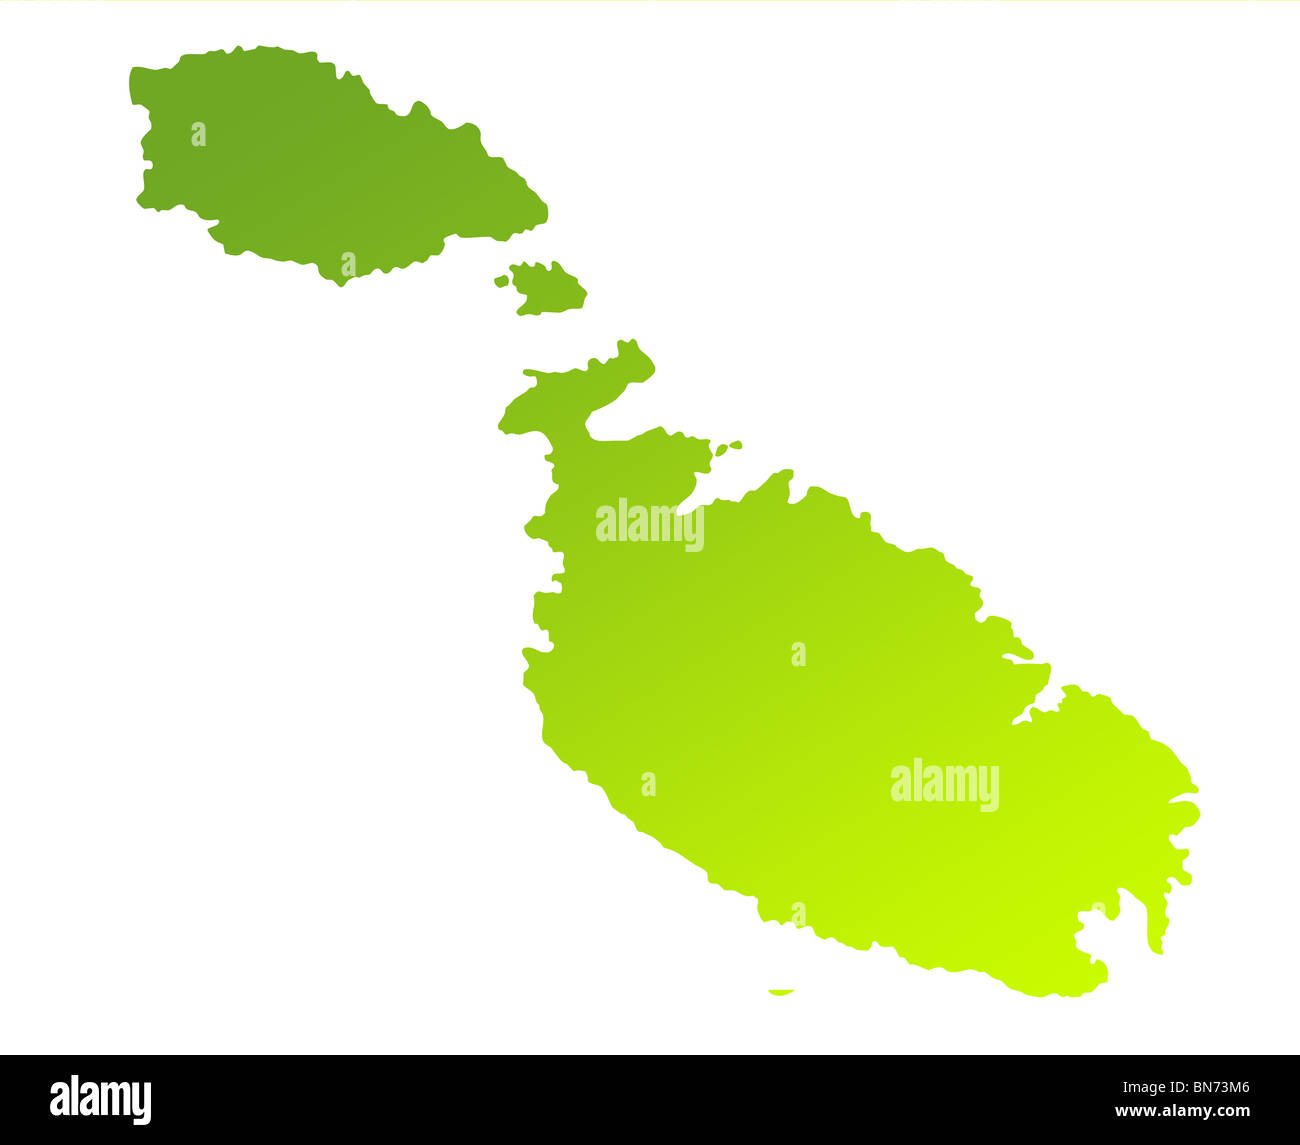 Green gradient map of Malta solated on a white background. Stock Photo